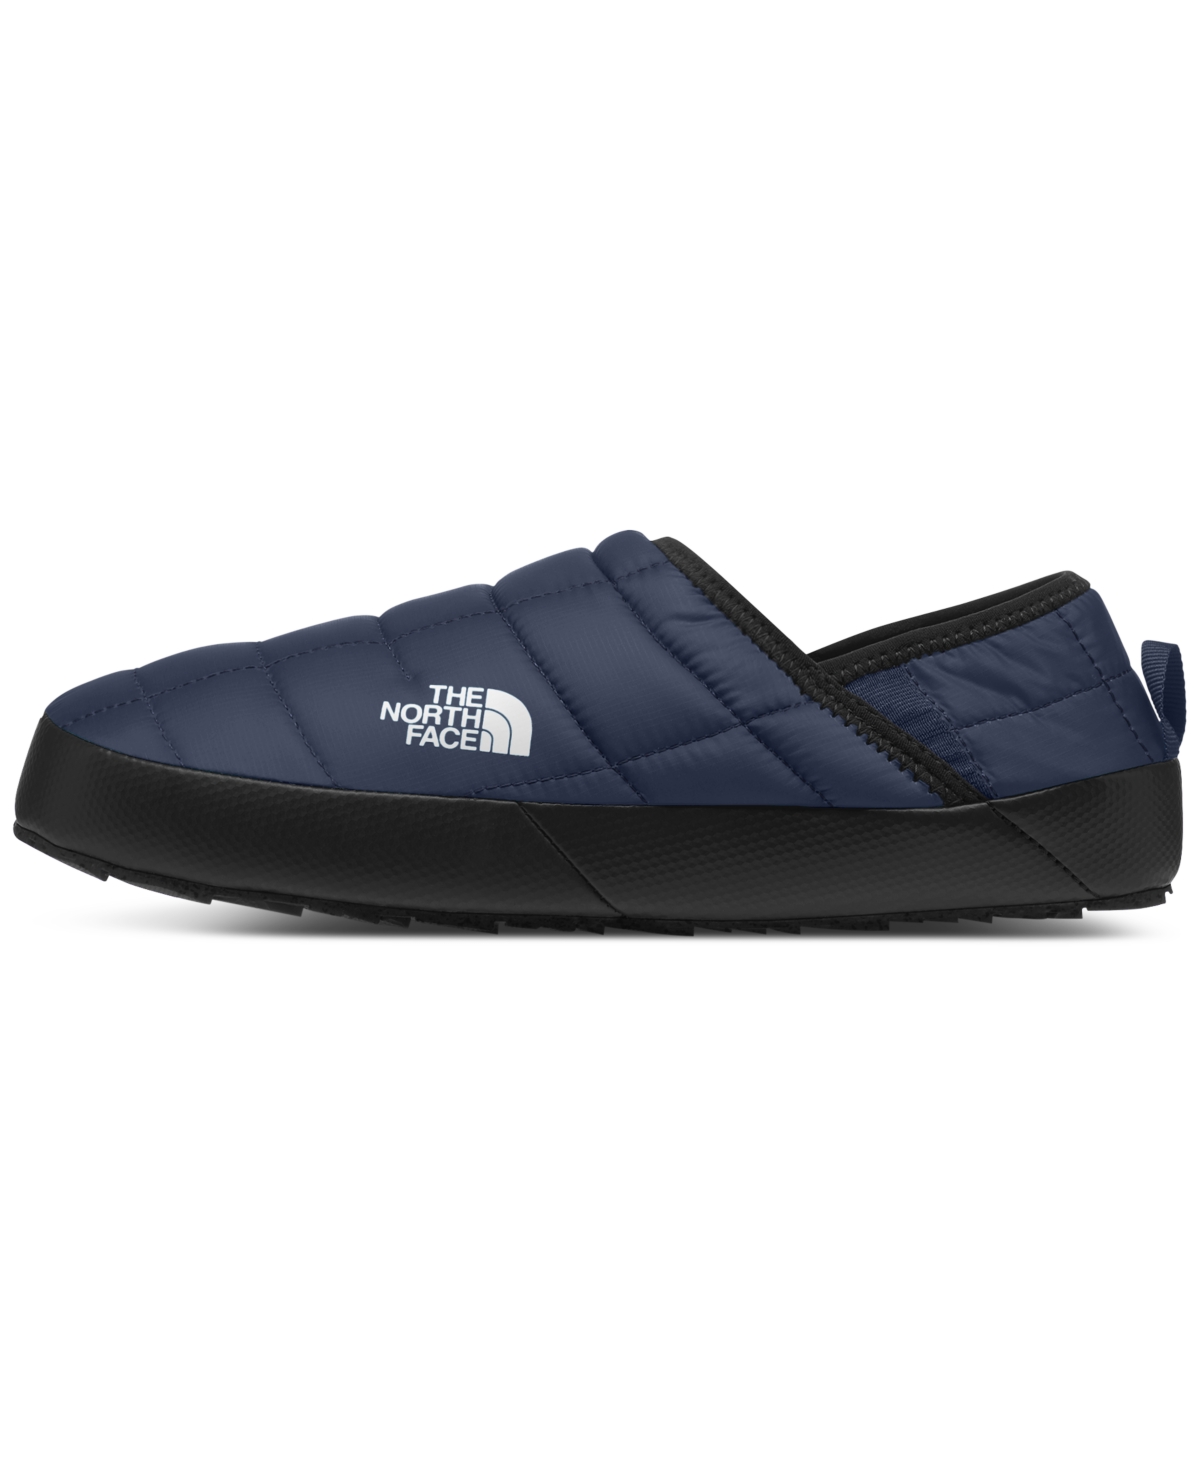 Men's ThermoBall Traction Mule V Slippers - Summit Navy/TNF White